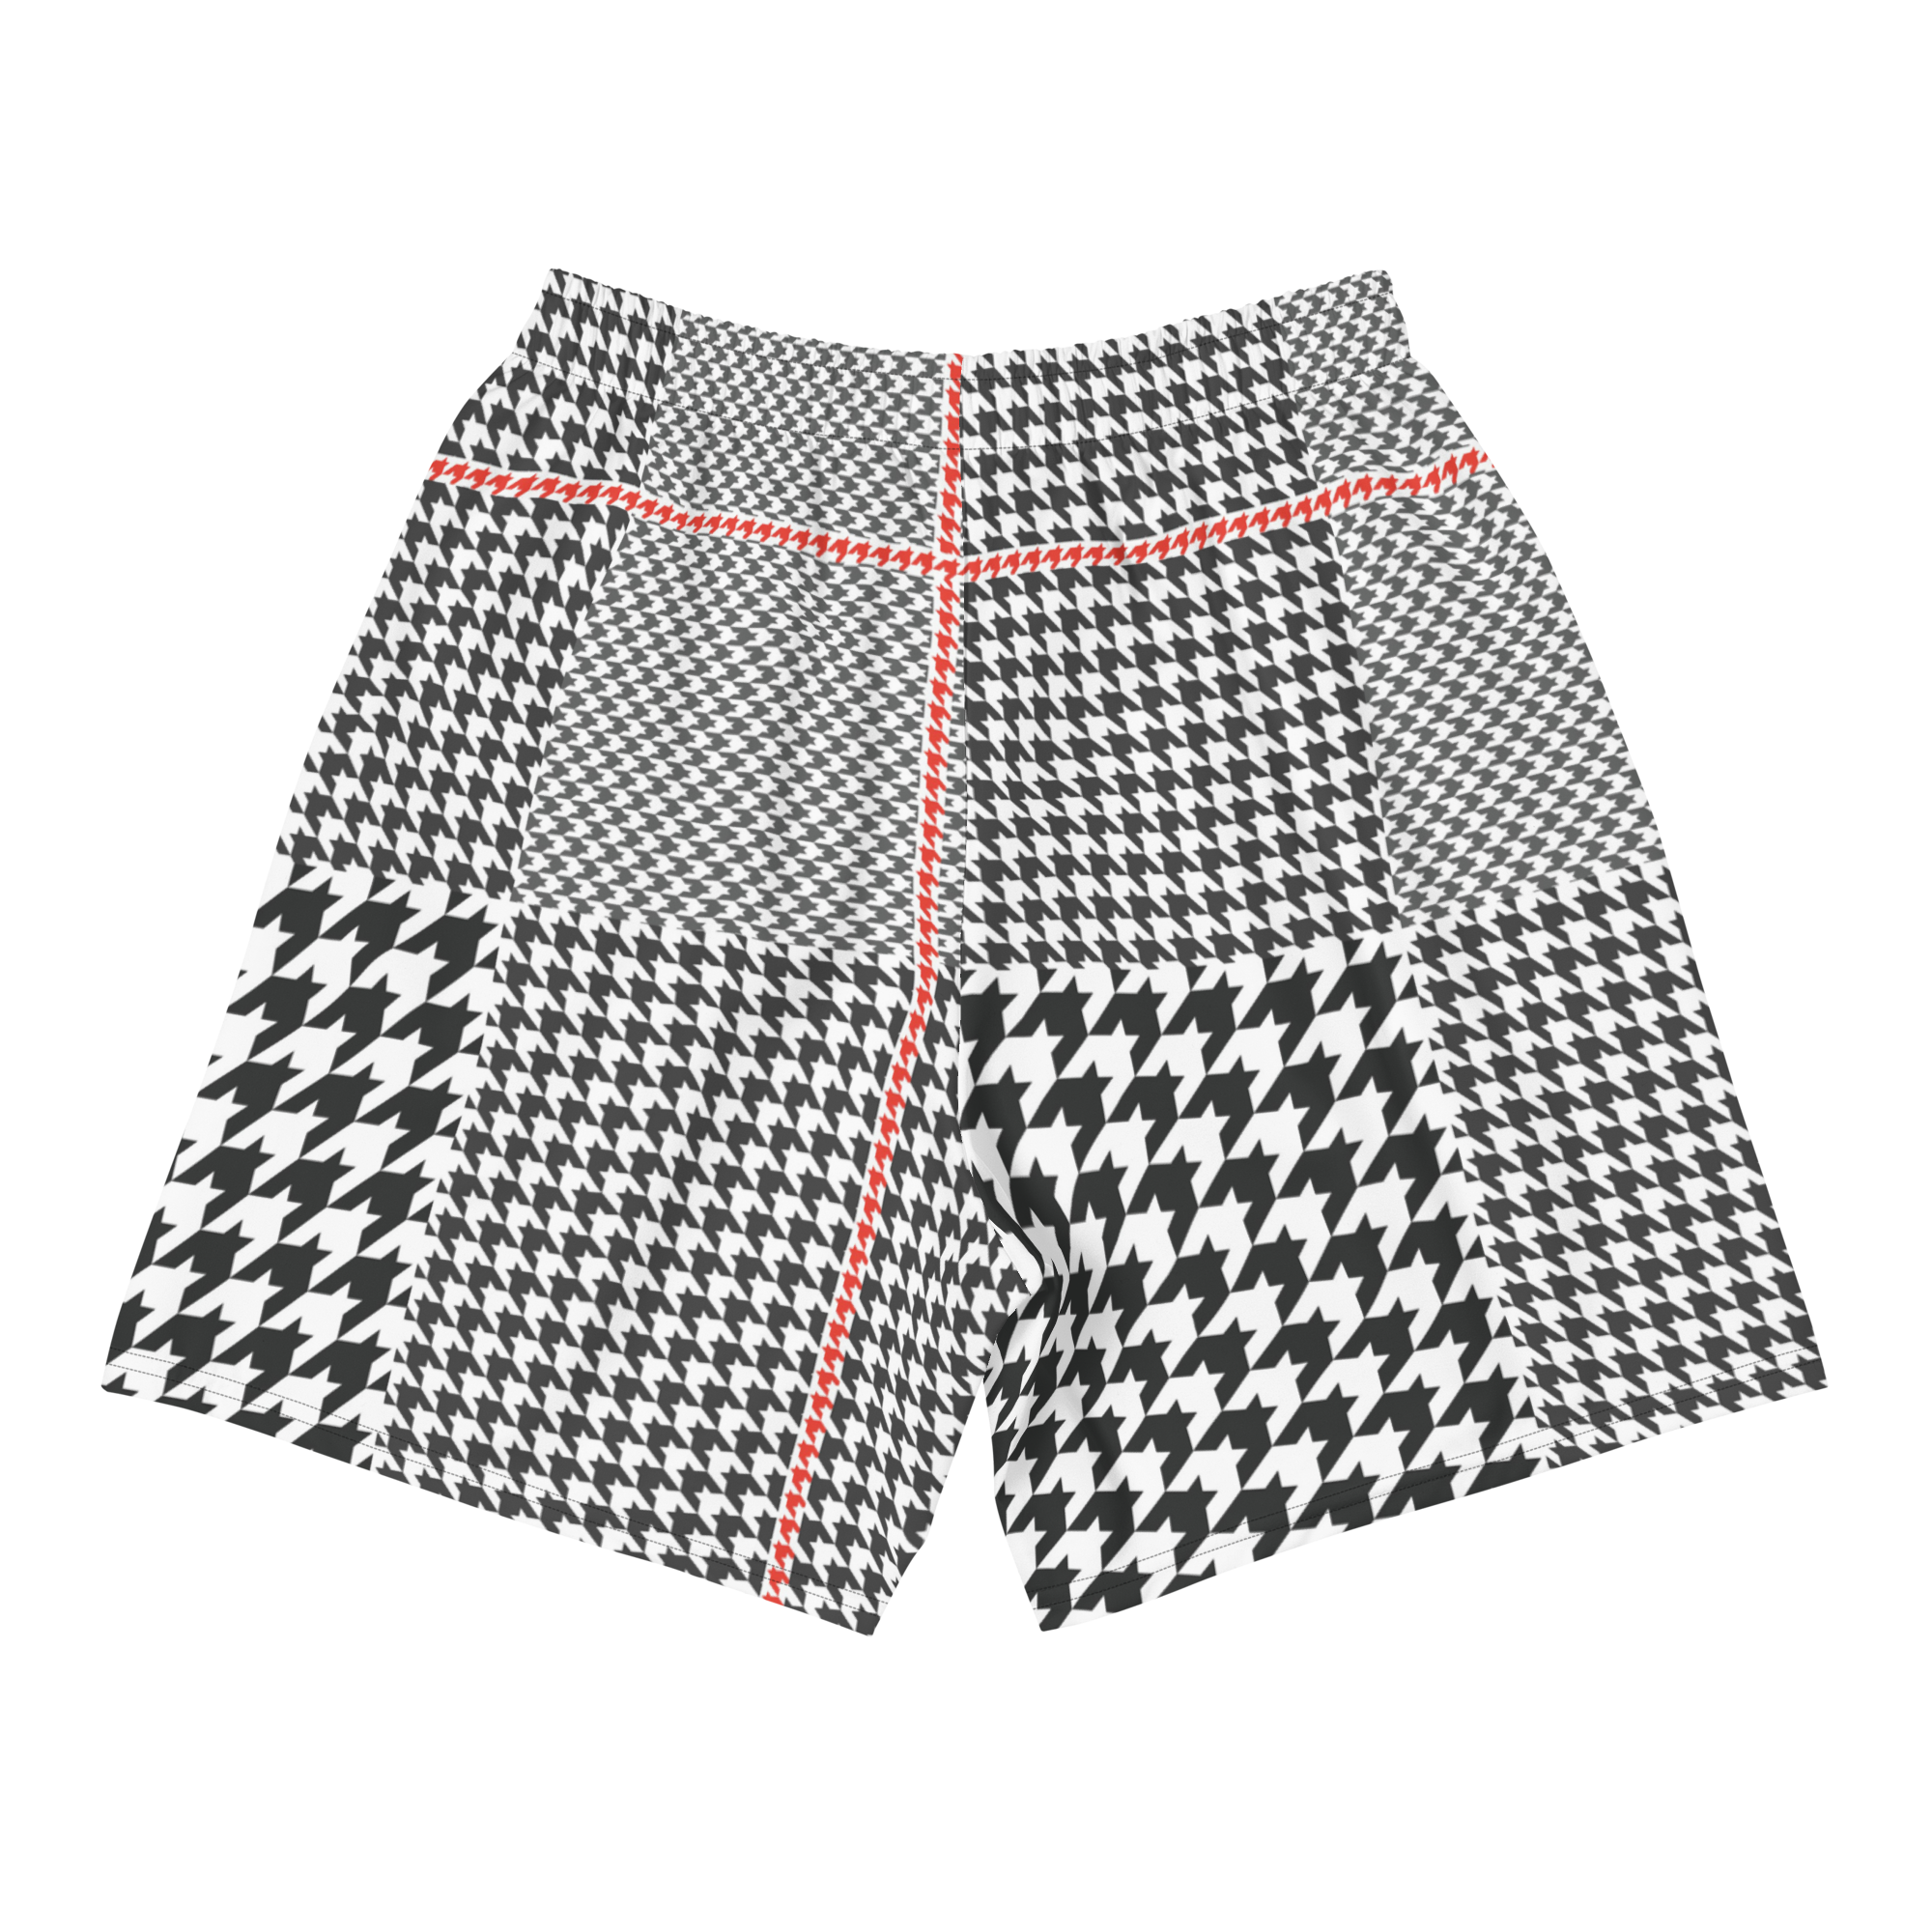 Houndstooth Athletic Shorts